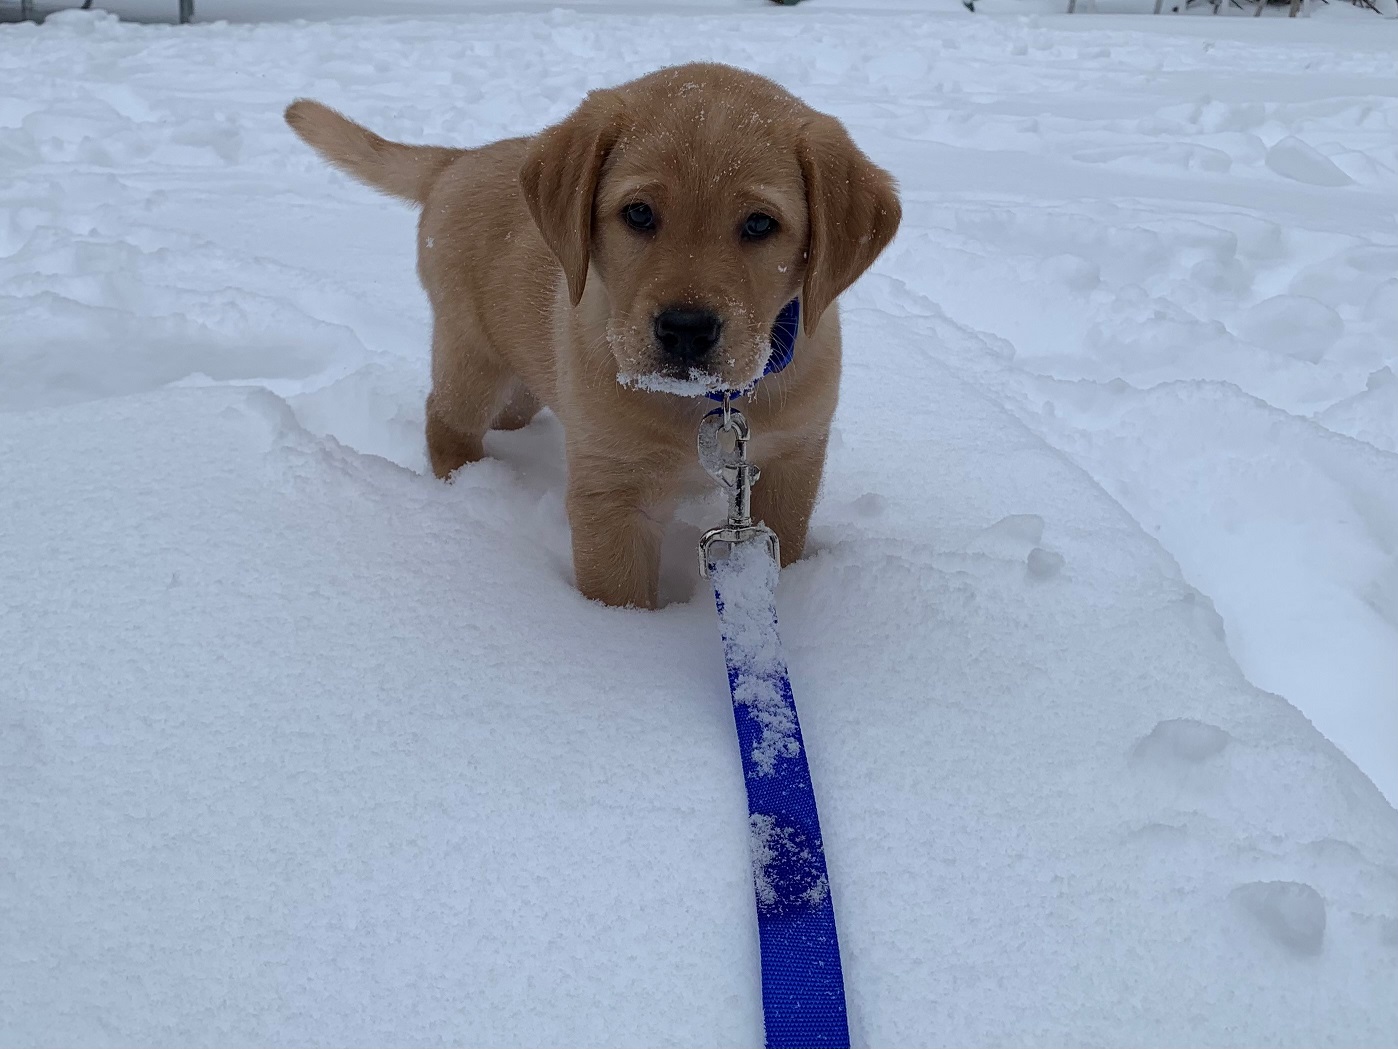 A tiny yellow Lab puppy stands confidently in a snow-covered yard. He has a white beard of snow as he looks into the camera with his warm, brown eyes.